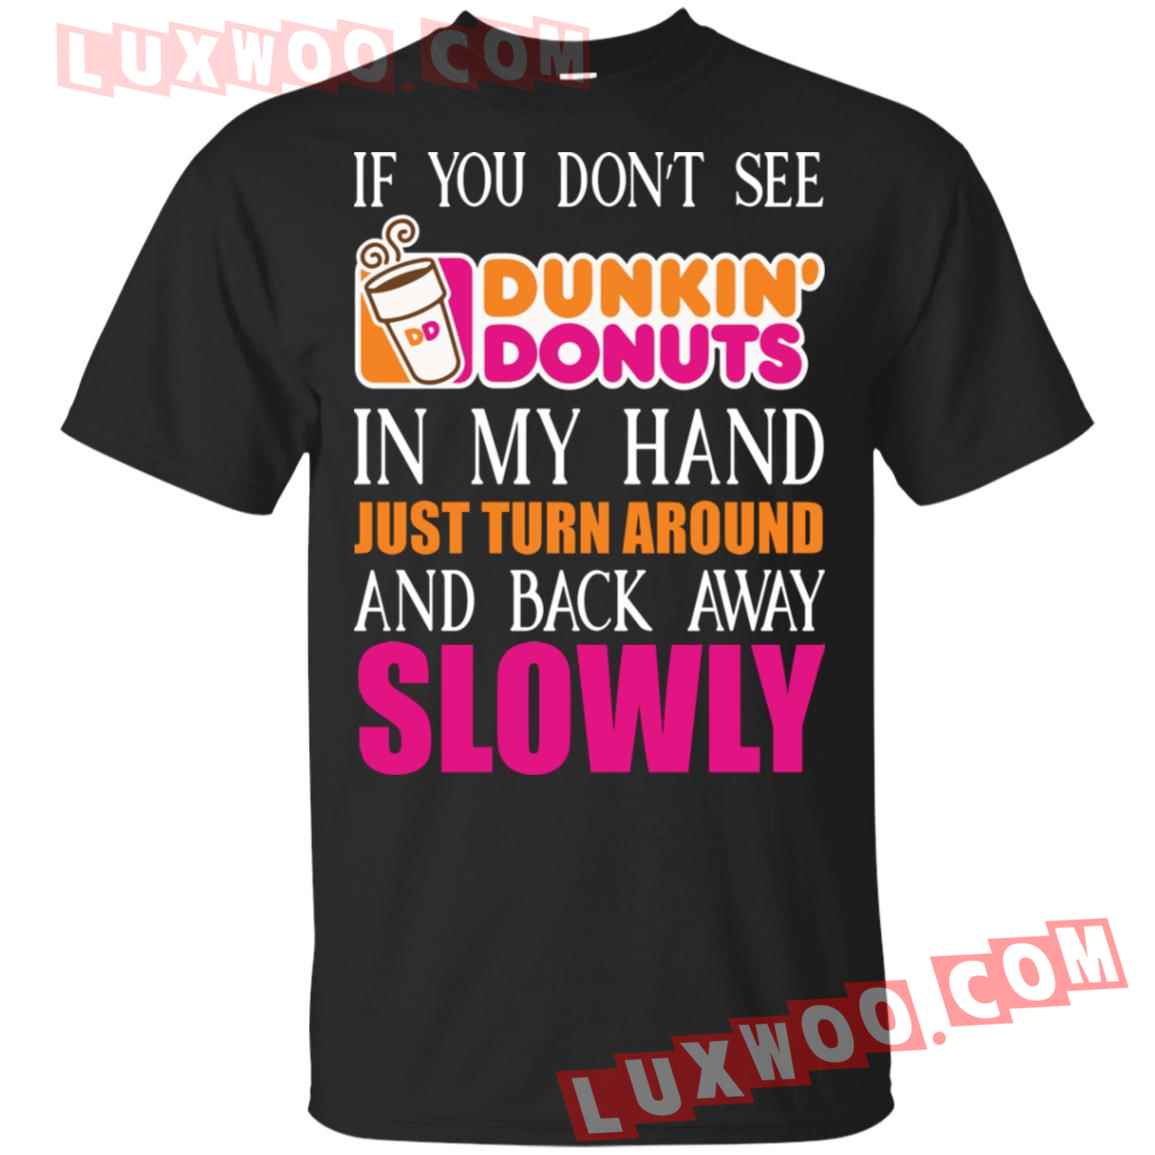 If You Dont See Dunkin Donuts In My Hand Shirt